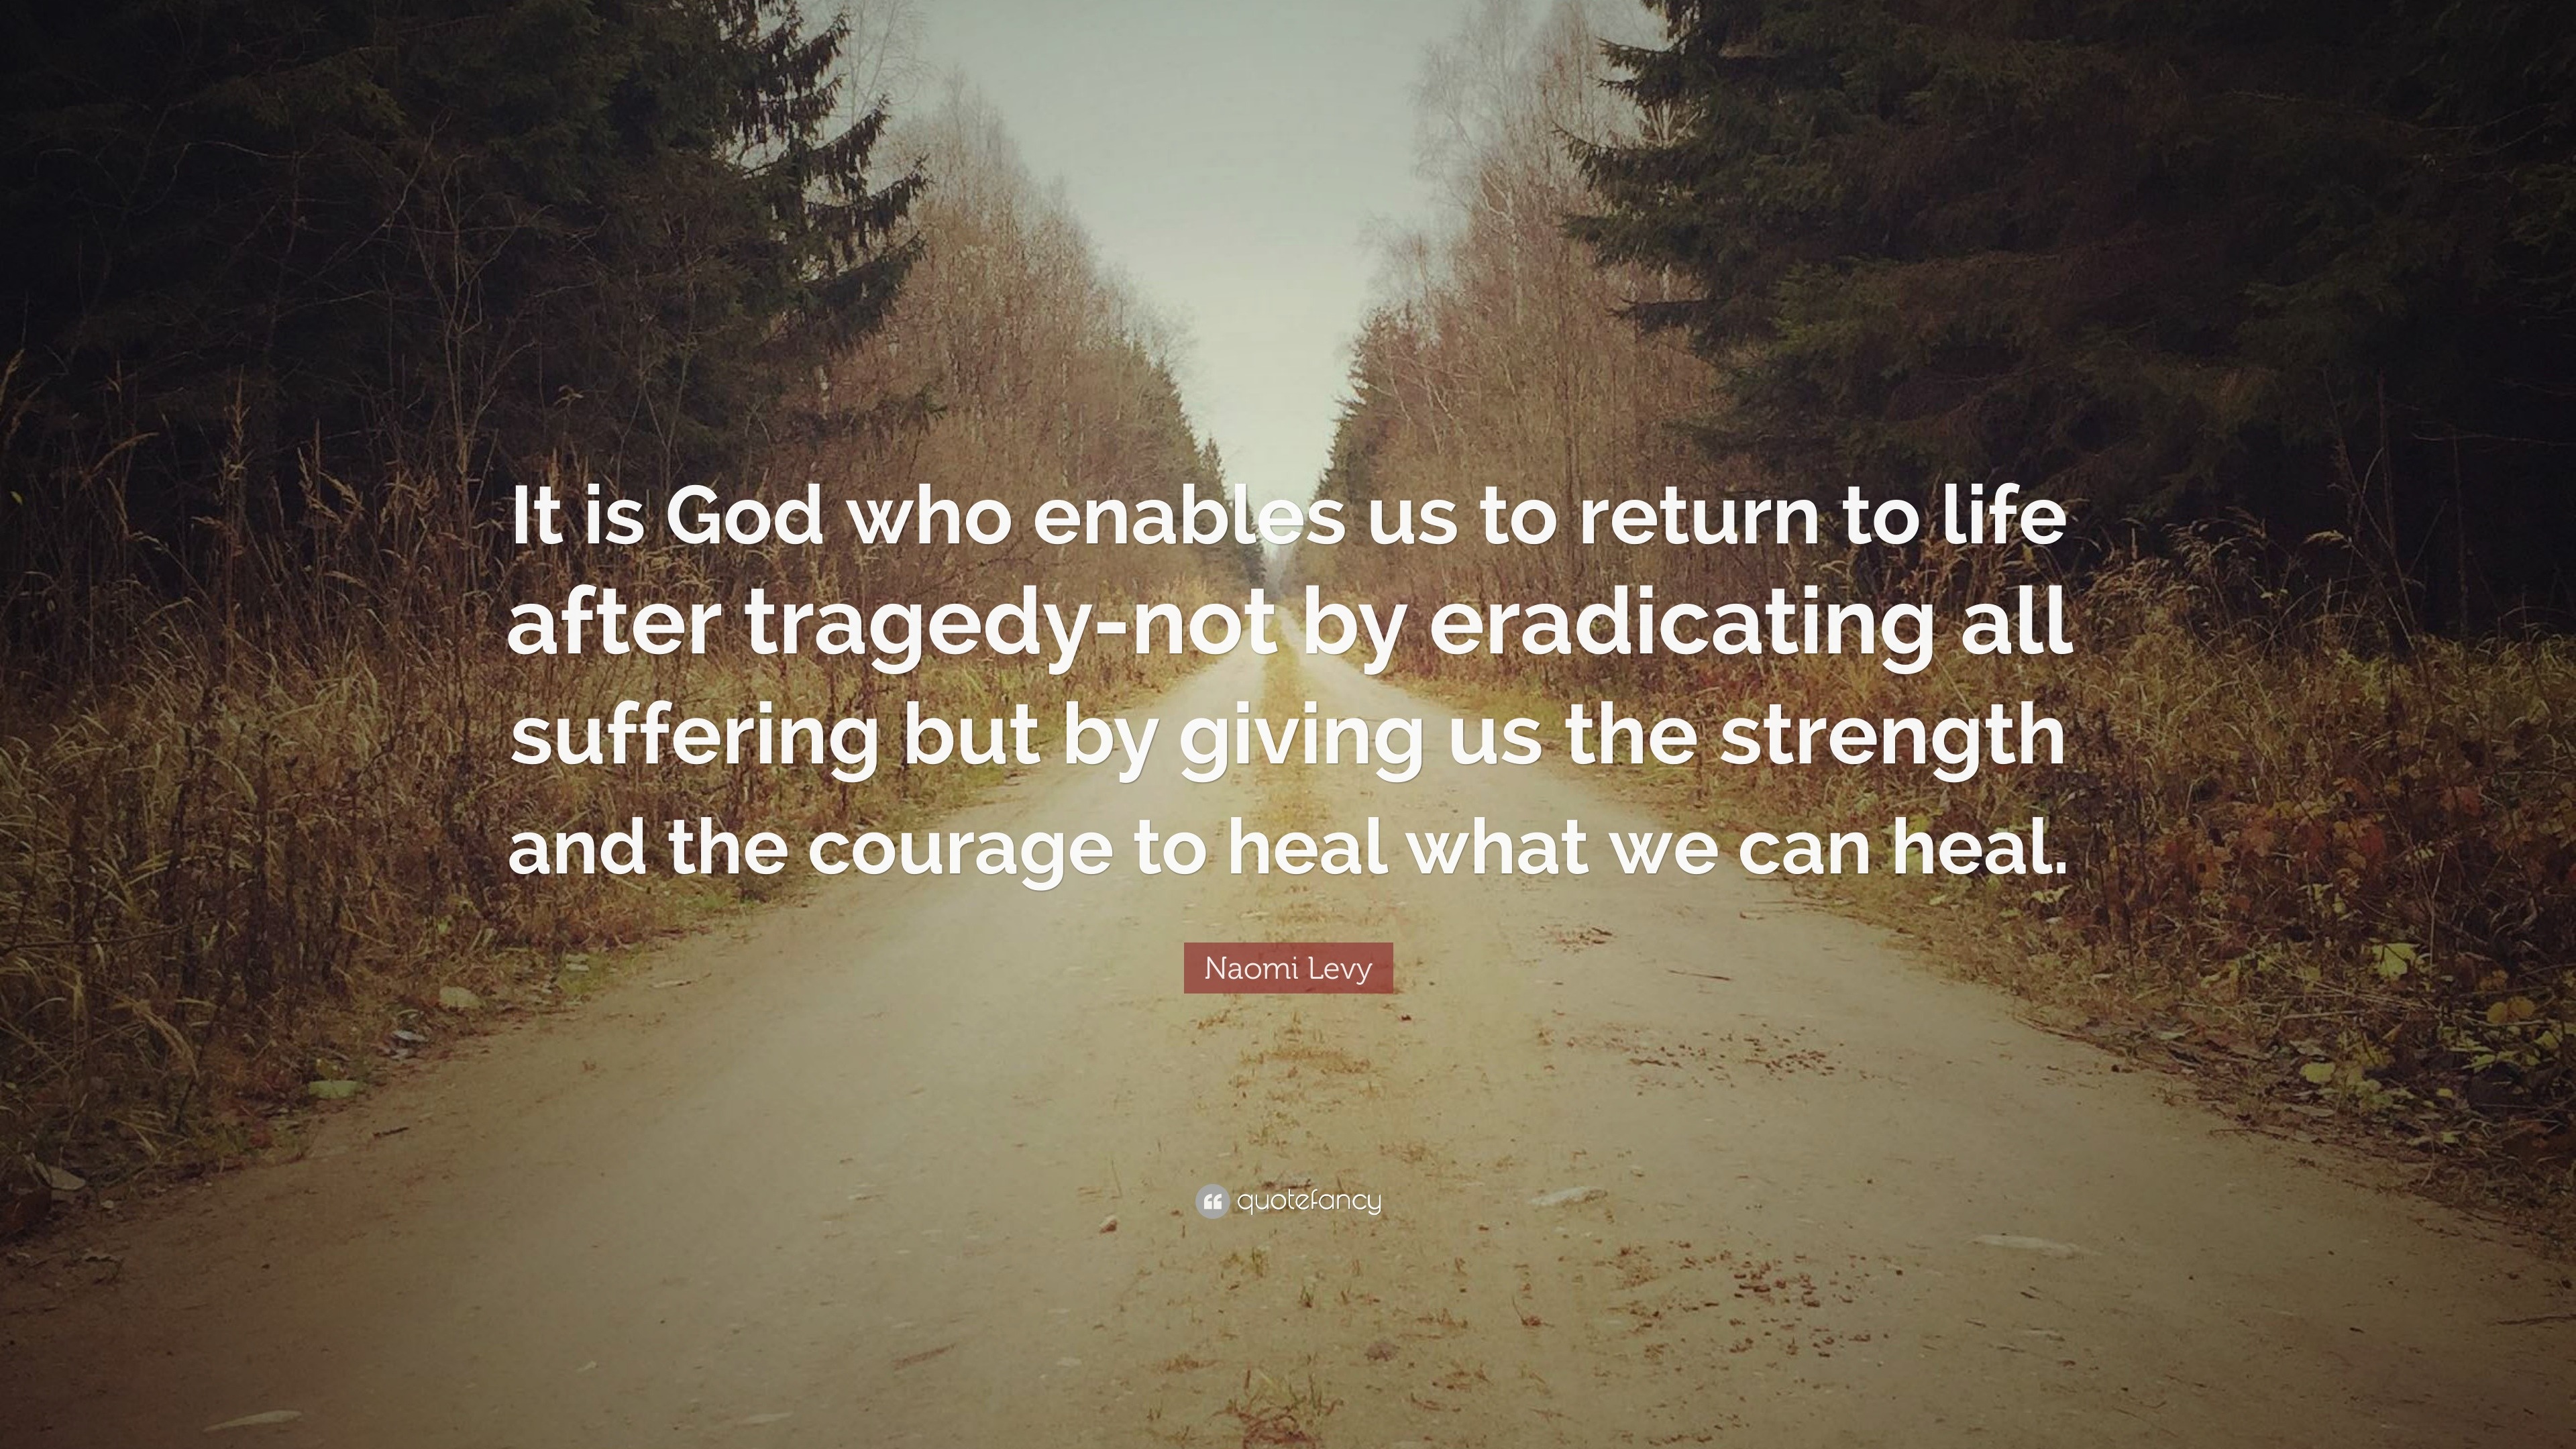 Naomi Levy Quote: “It is God who enables us to return to life after ...